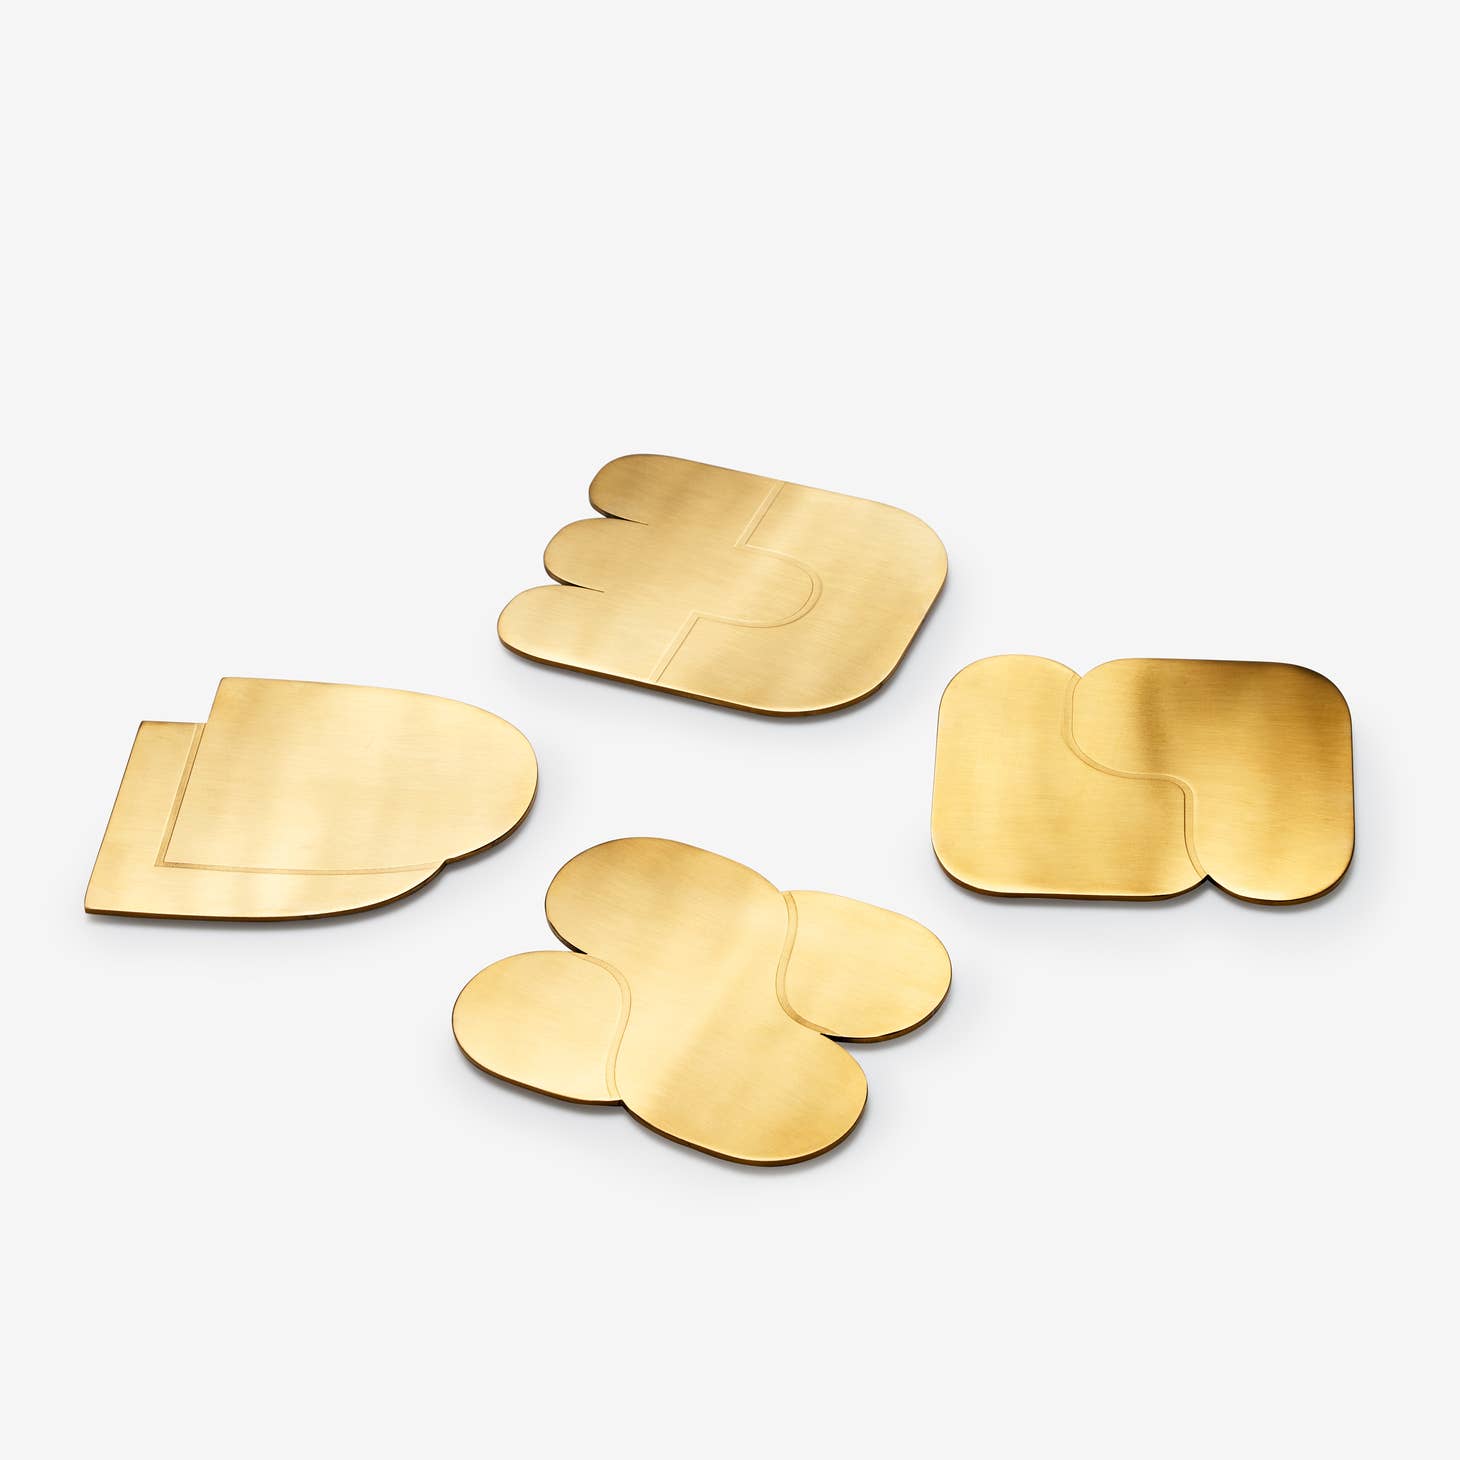 areaware together coasters / Set of four brass-plated coasters uses abstract, interlocking shapes to signify connection and togetherness. The weightiness of the brass ensures none of those sticking-to-your-cup situations when picked up, & designed to protect your surfaces from watermarks and scratches. 